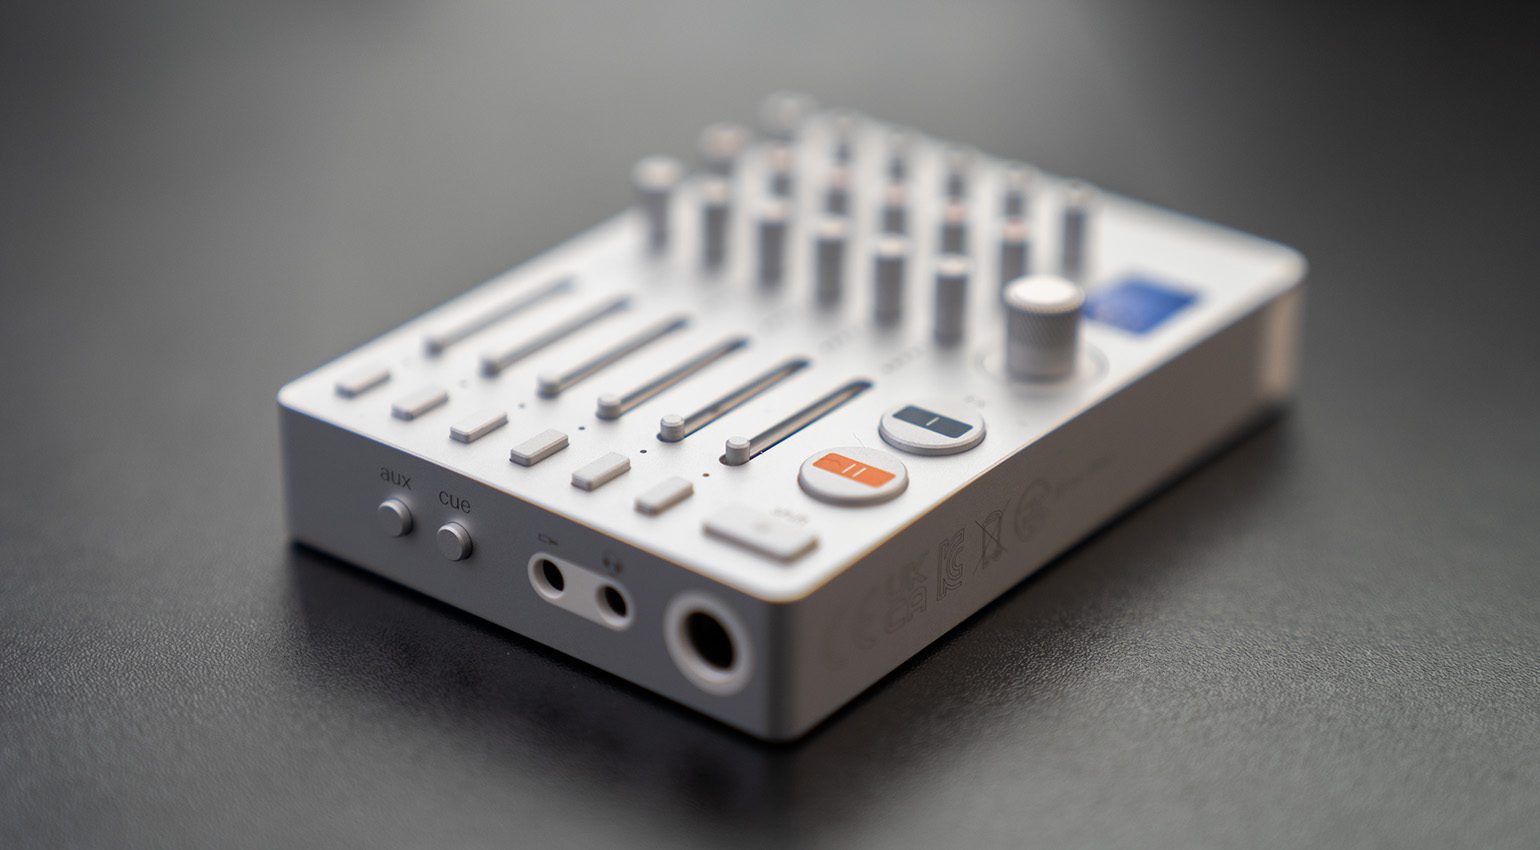 Teenage Engineering TX-6 Review: Is it the world's smallest mixer? 